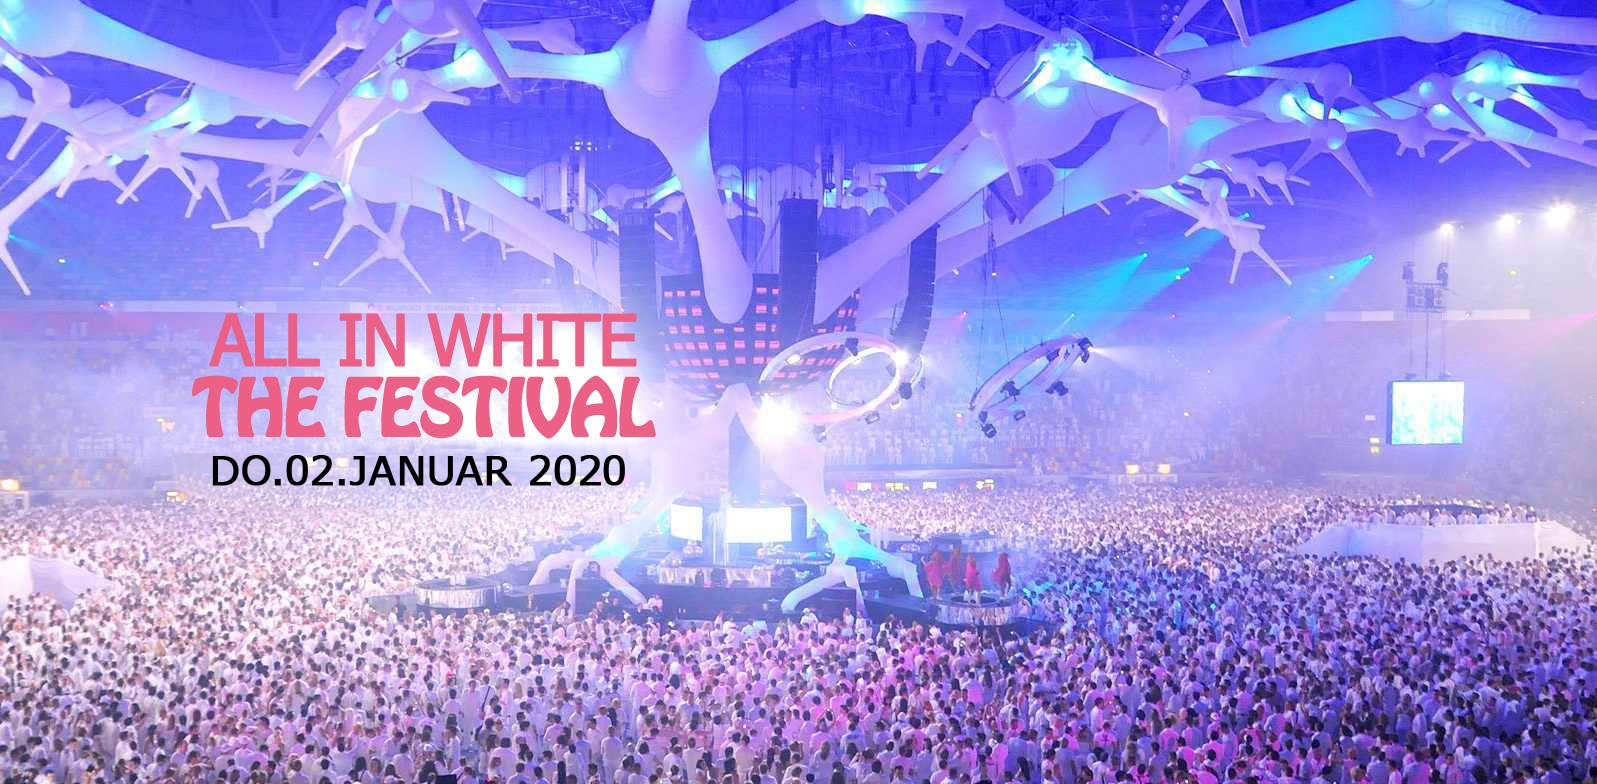 ALL IN White "The Festival" Donnerstag, 02.01.2020